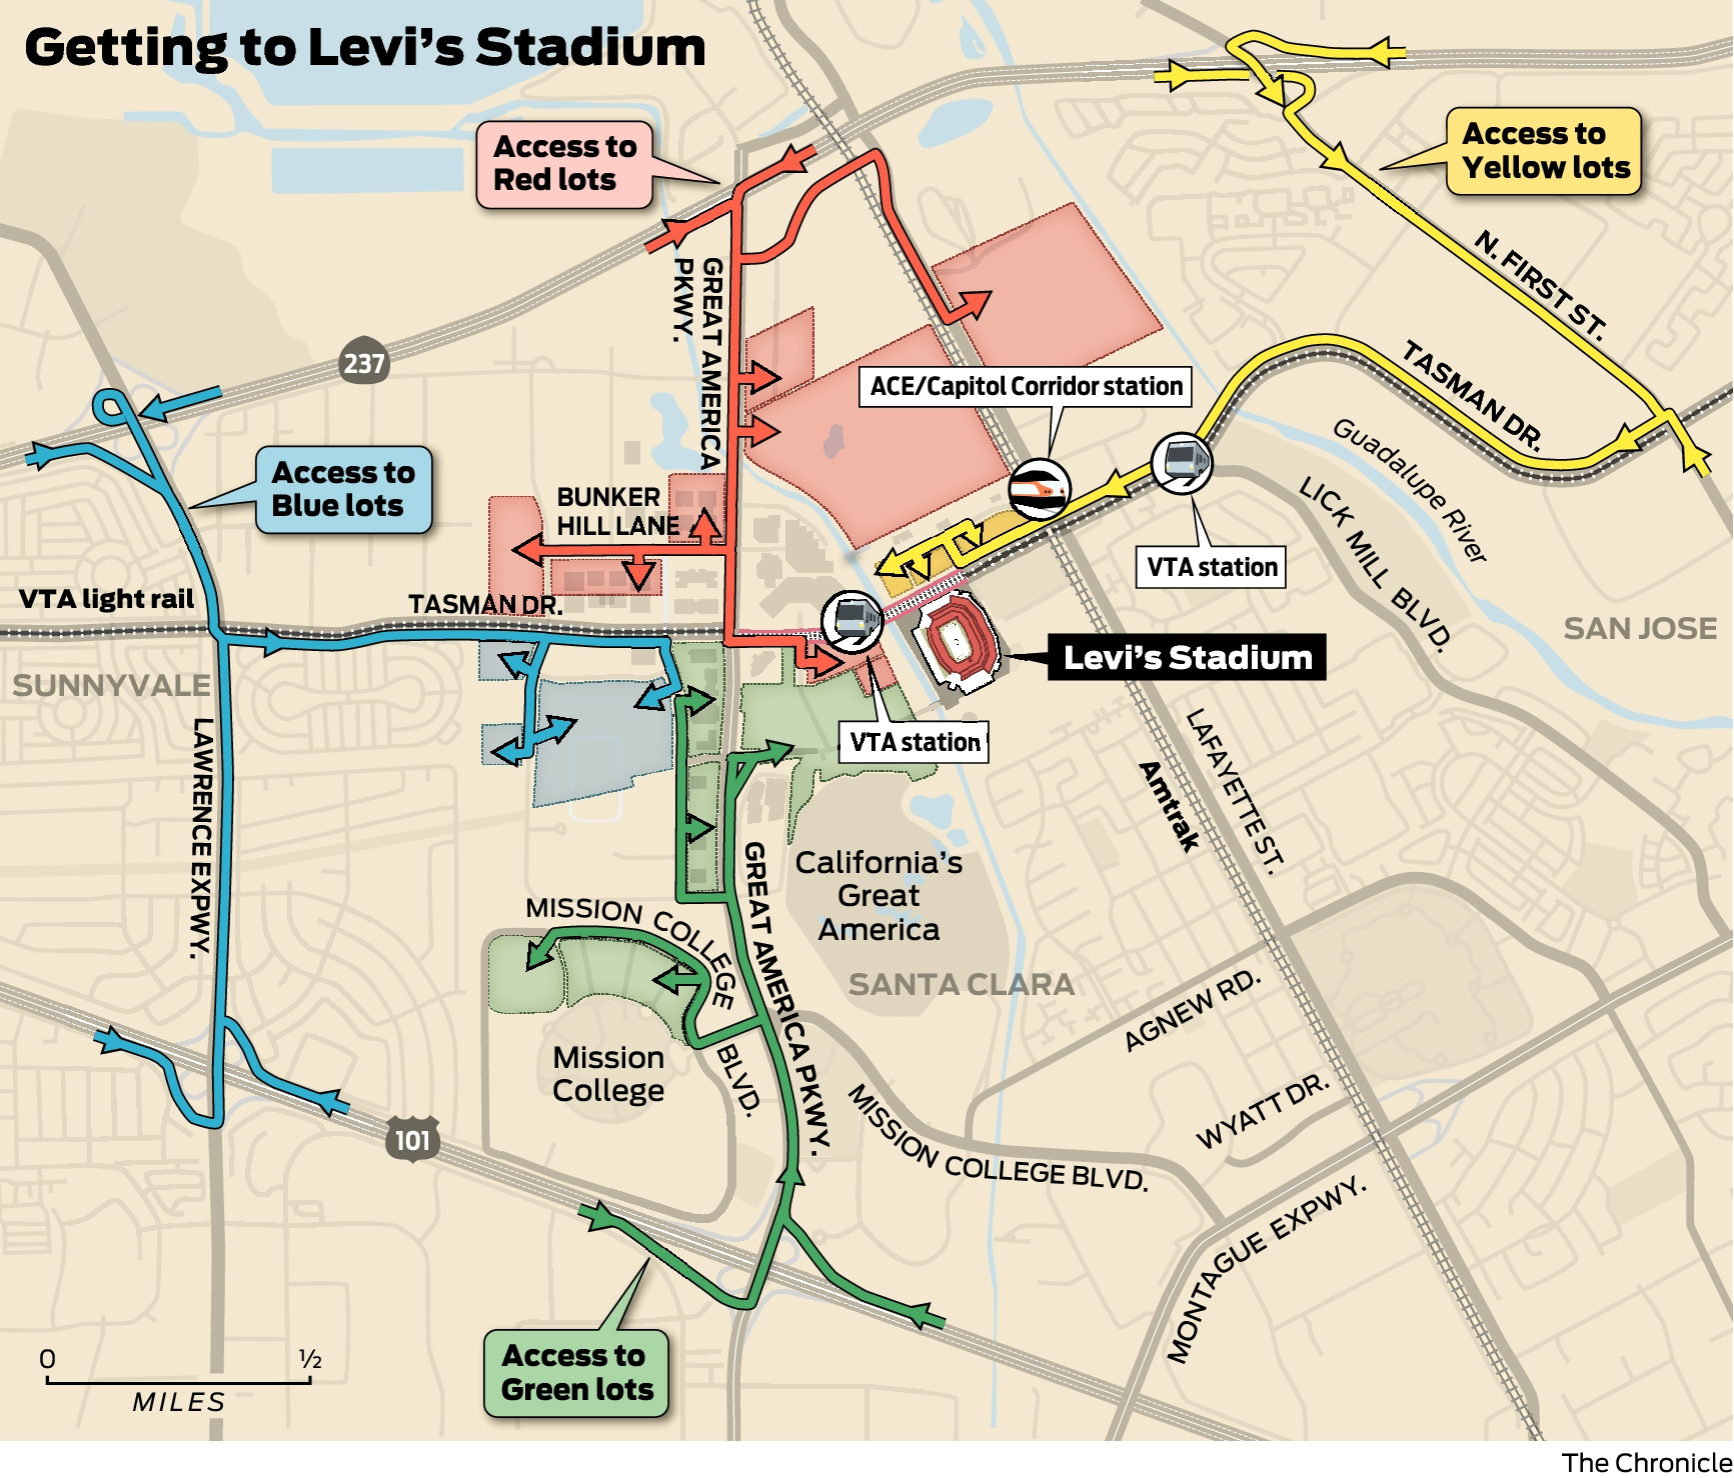 Thursday night 49ers game to further complicate typical traffic gridlock